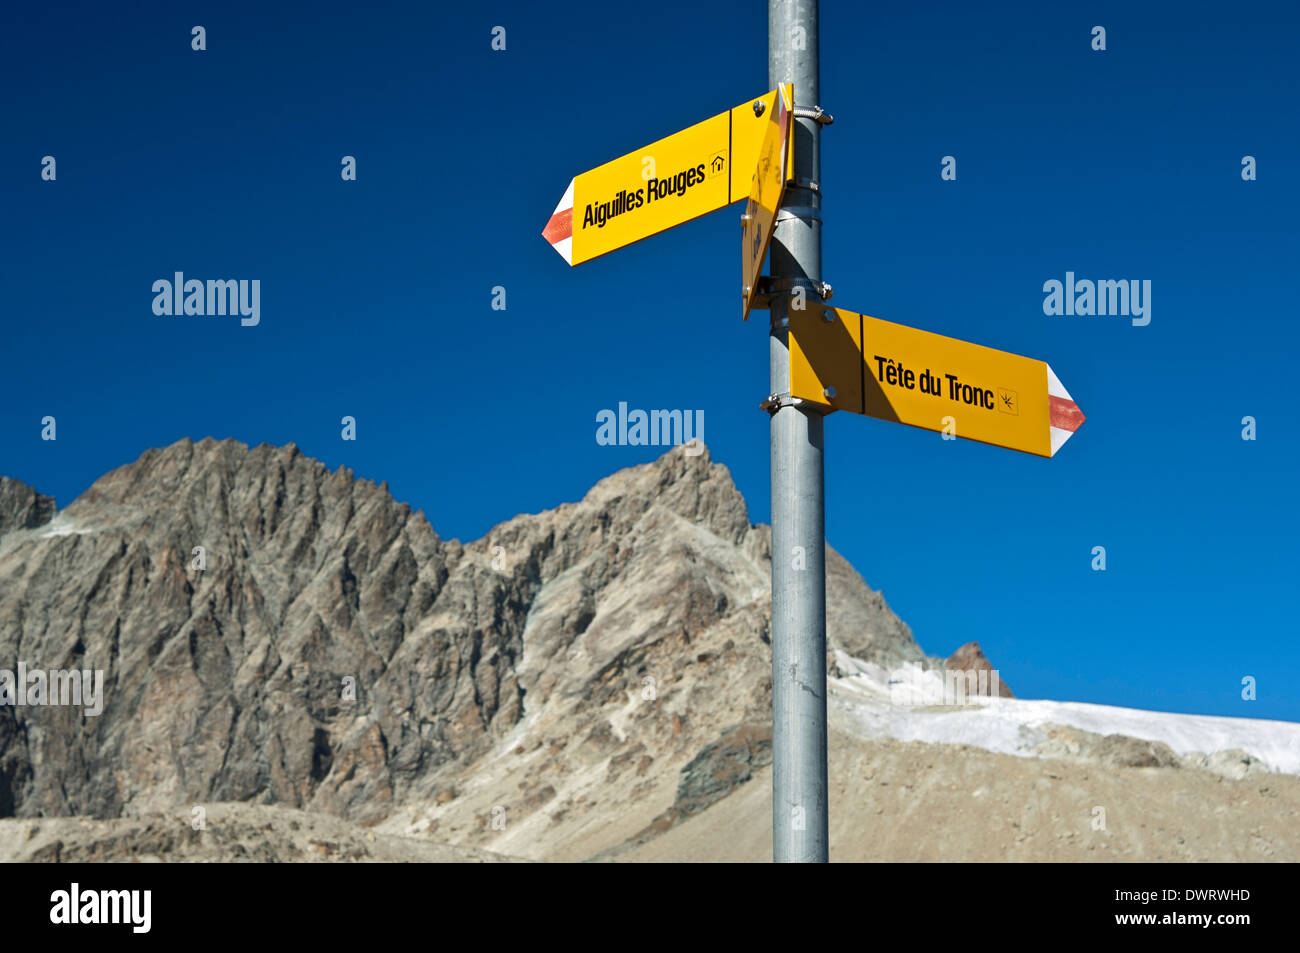 Directional sign to the mountain refuge Aiguilles rouges, Arolla, Valais, Switzerland Stock Photo